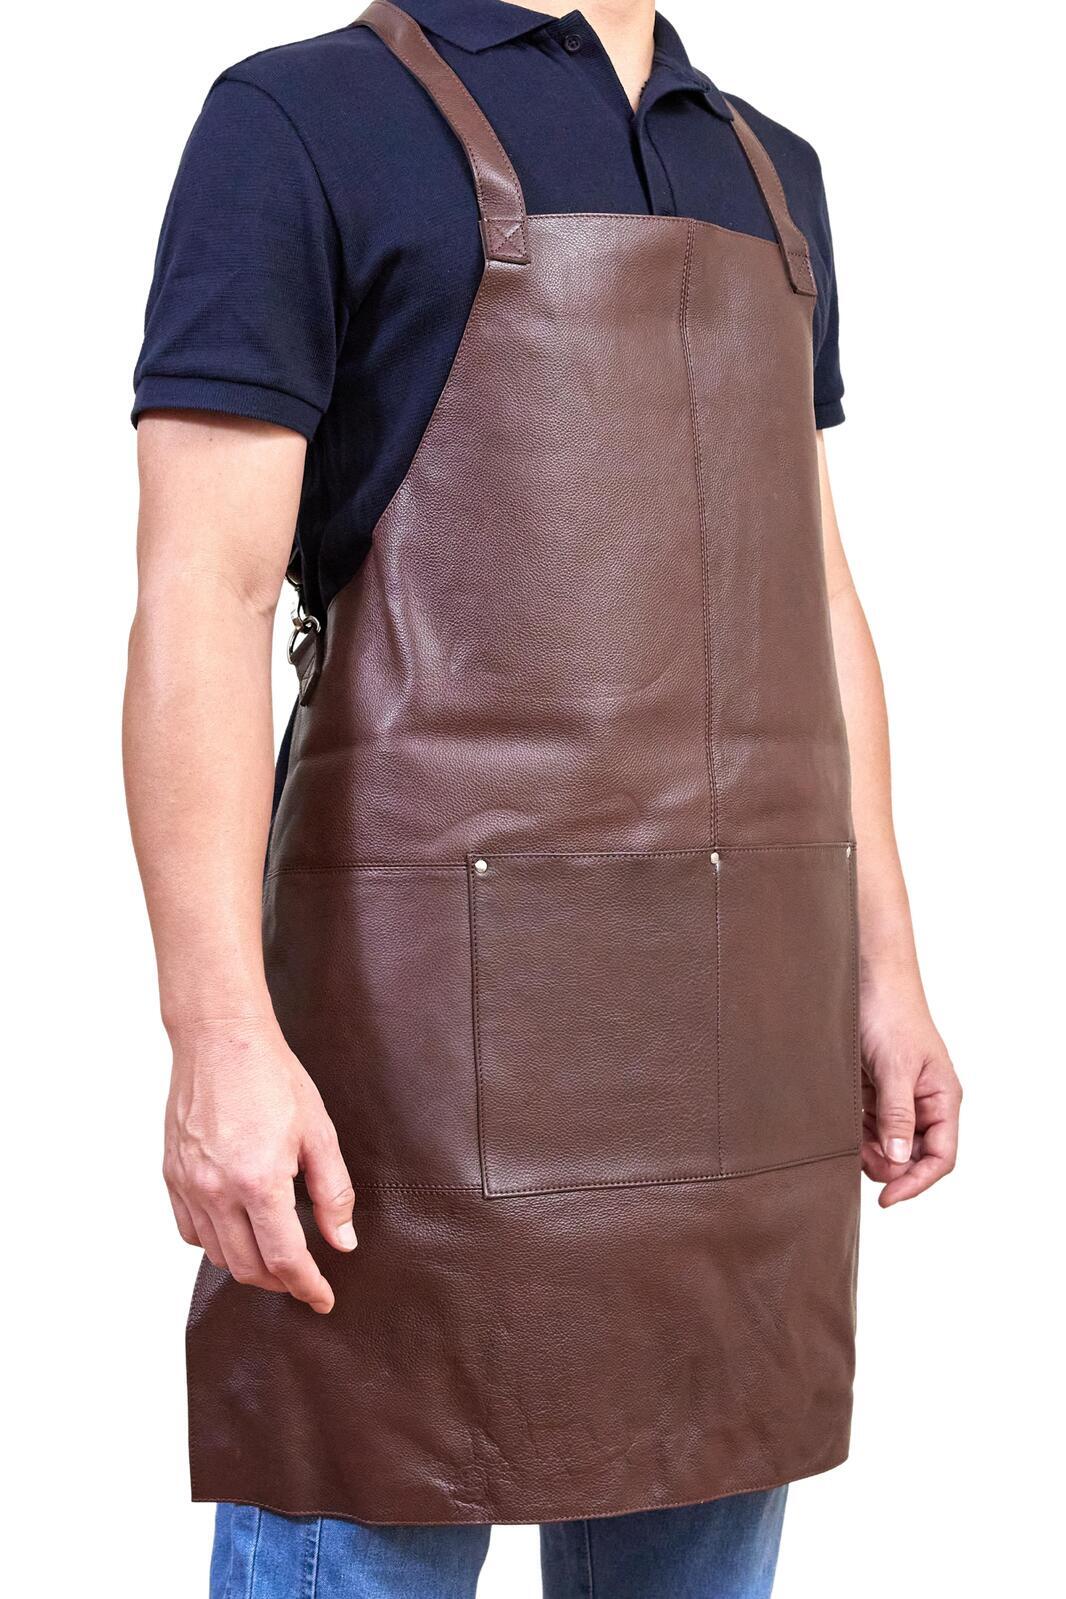 Professional Leather Apron Butcher Woodwork Hairdressing Barber Chef - Brown